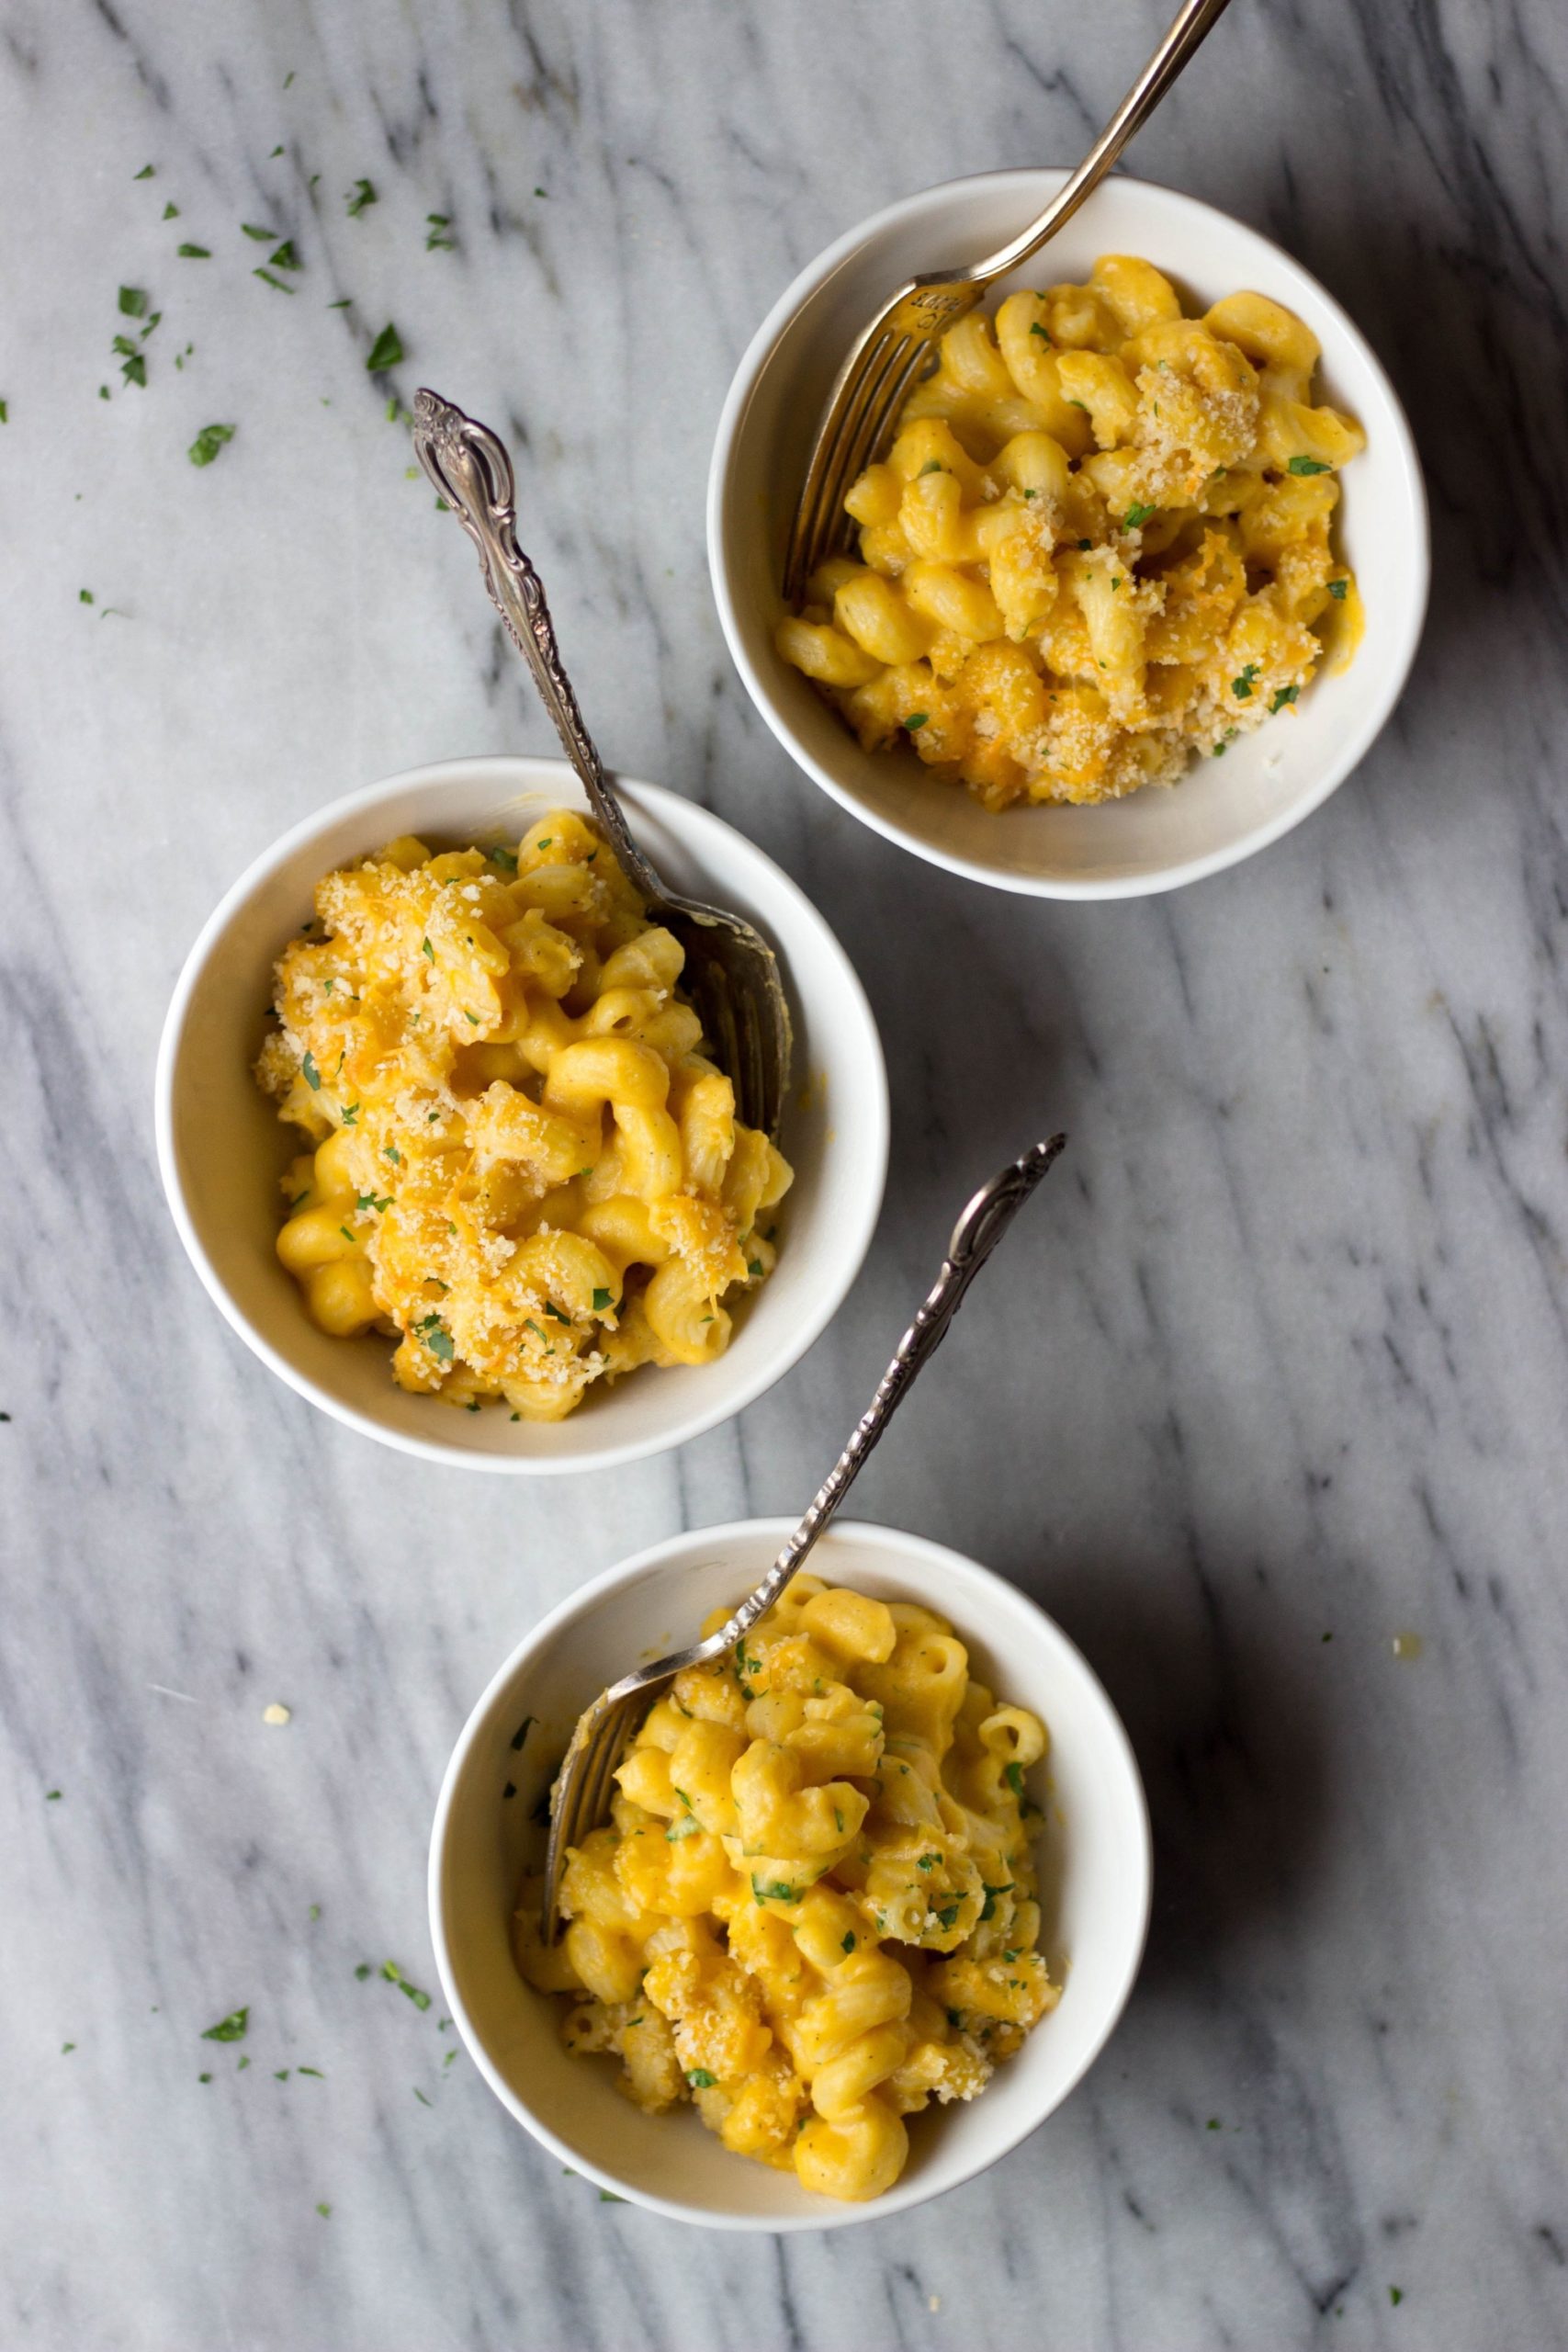   Pictured: Butternut Squash Mac & Cheese by The Gourmet RD (48 Quick and Easy Meatless Meals for Busy People)  